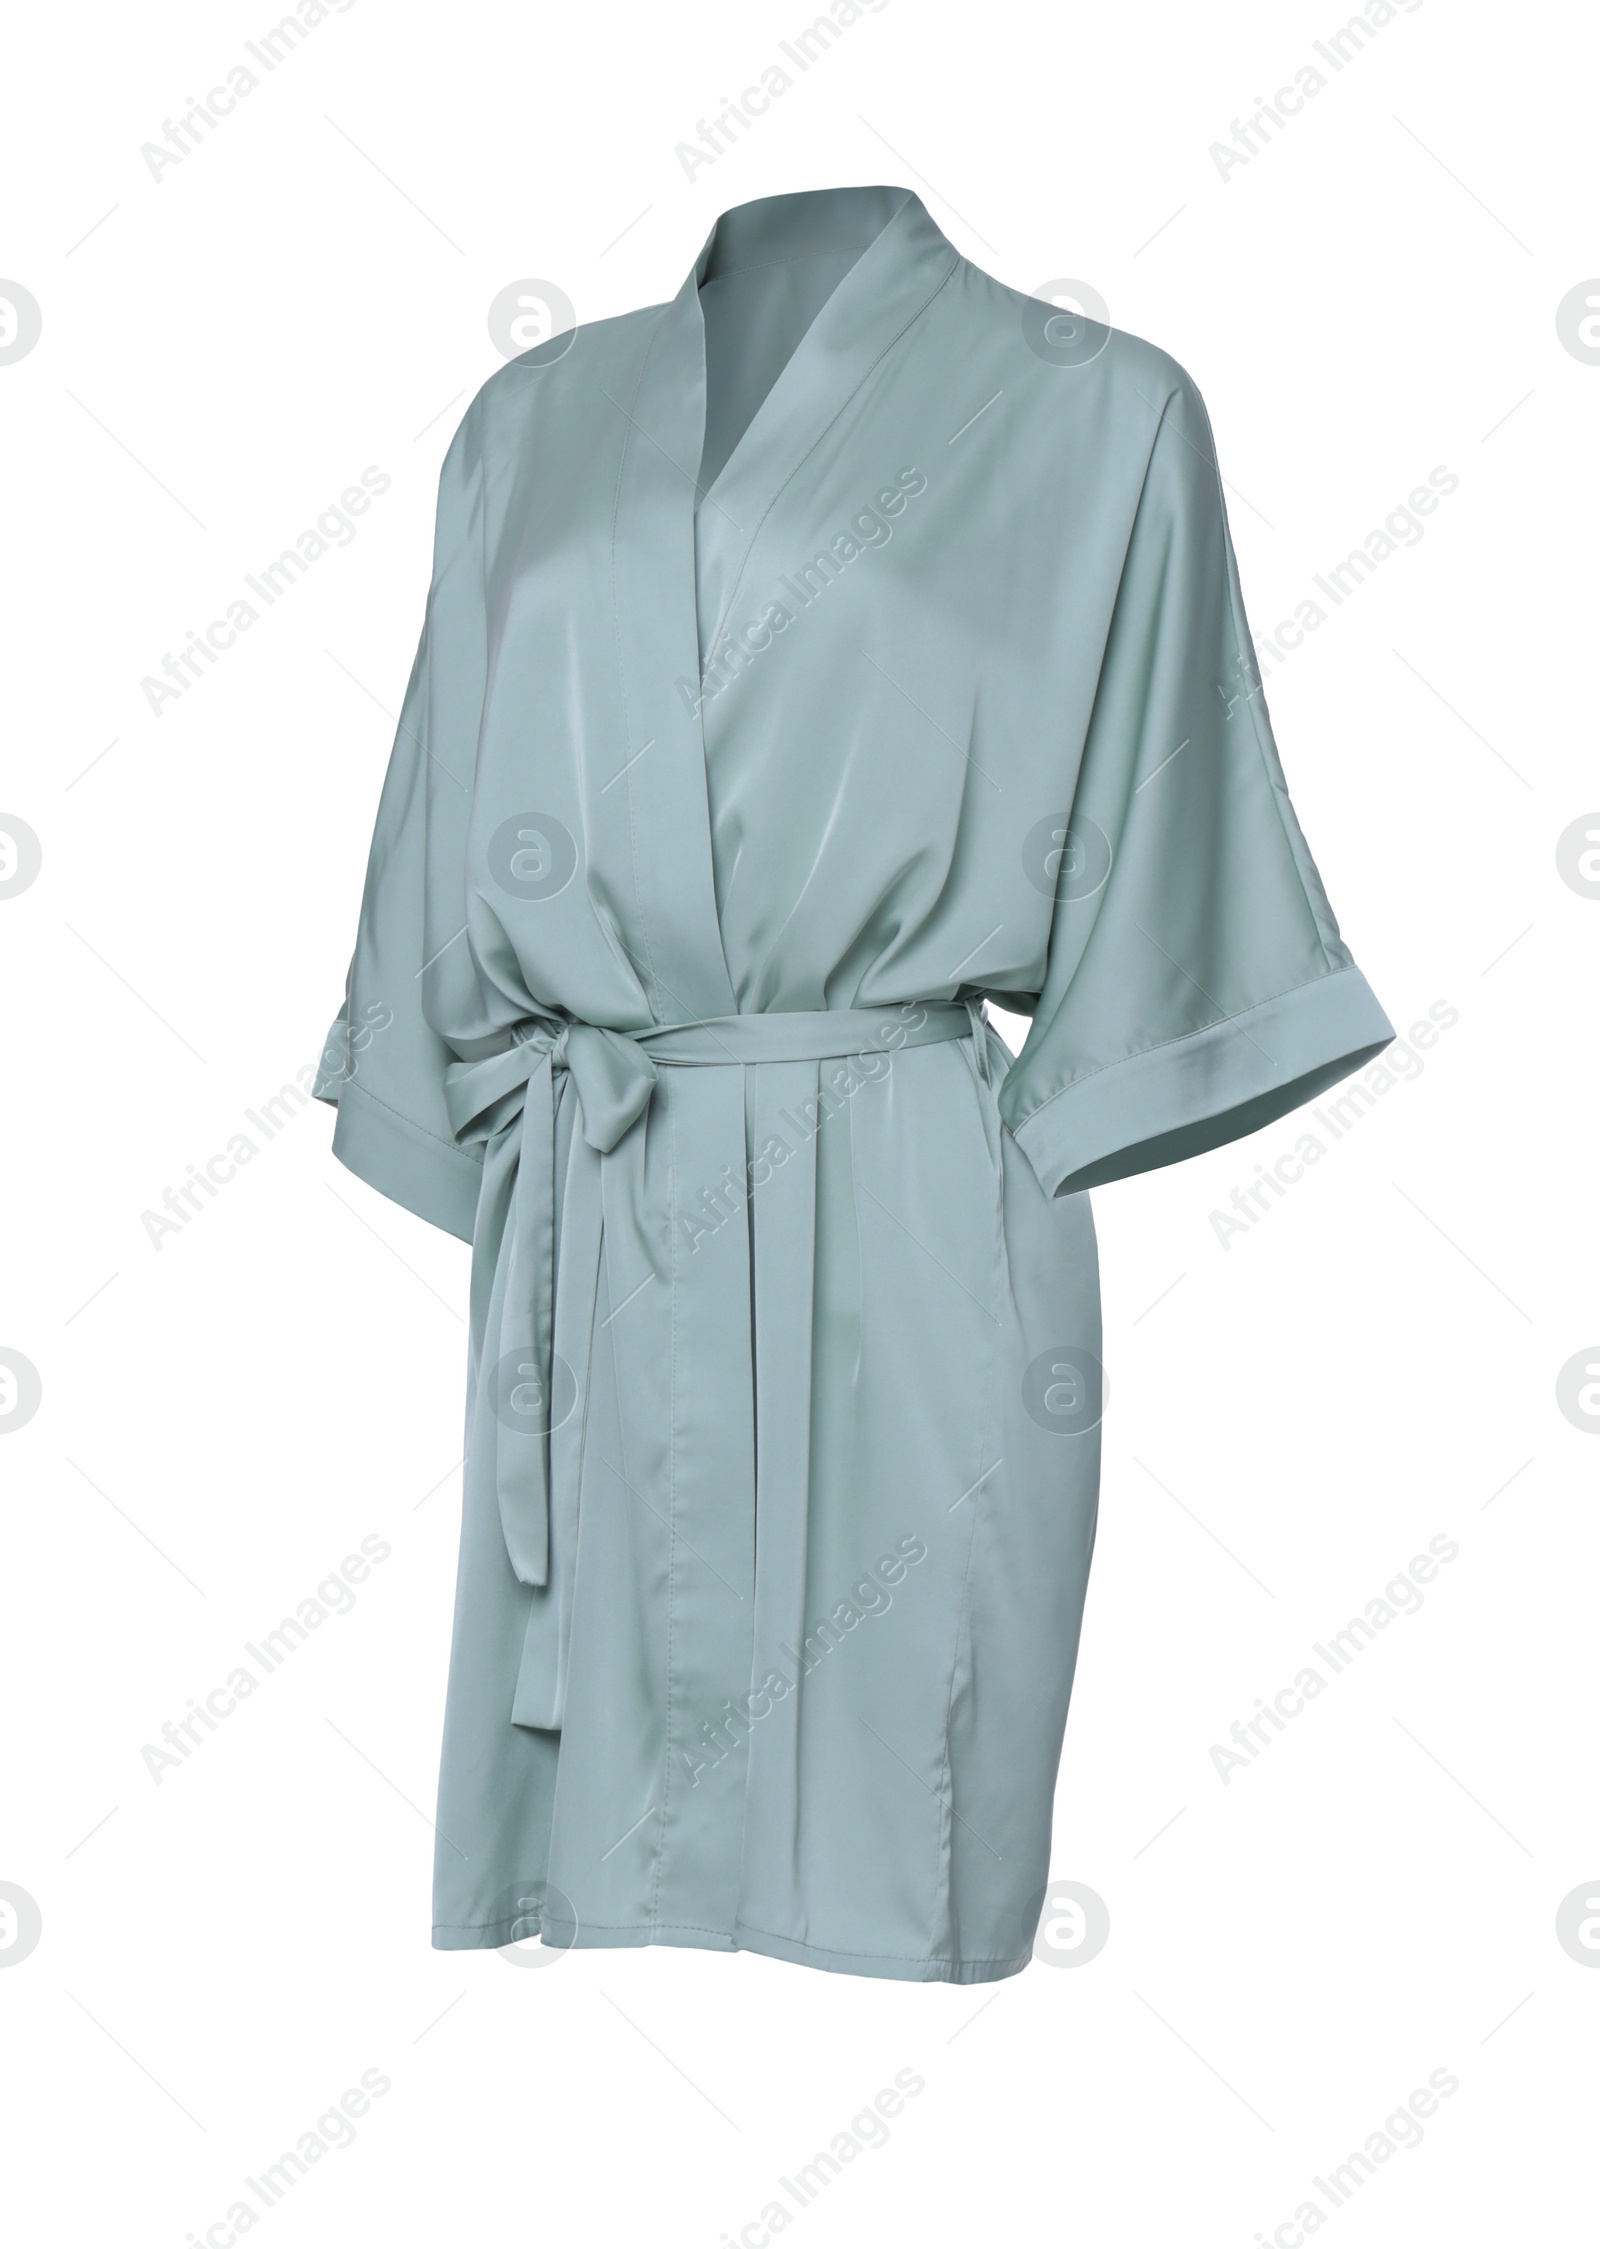 Image of Pale green silk bathrobe isolated on white